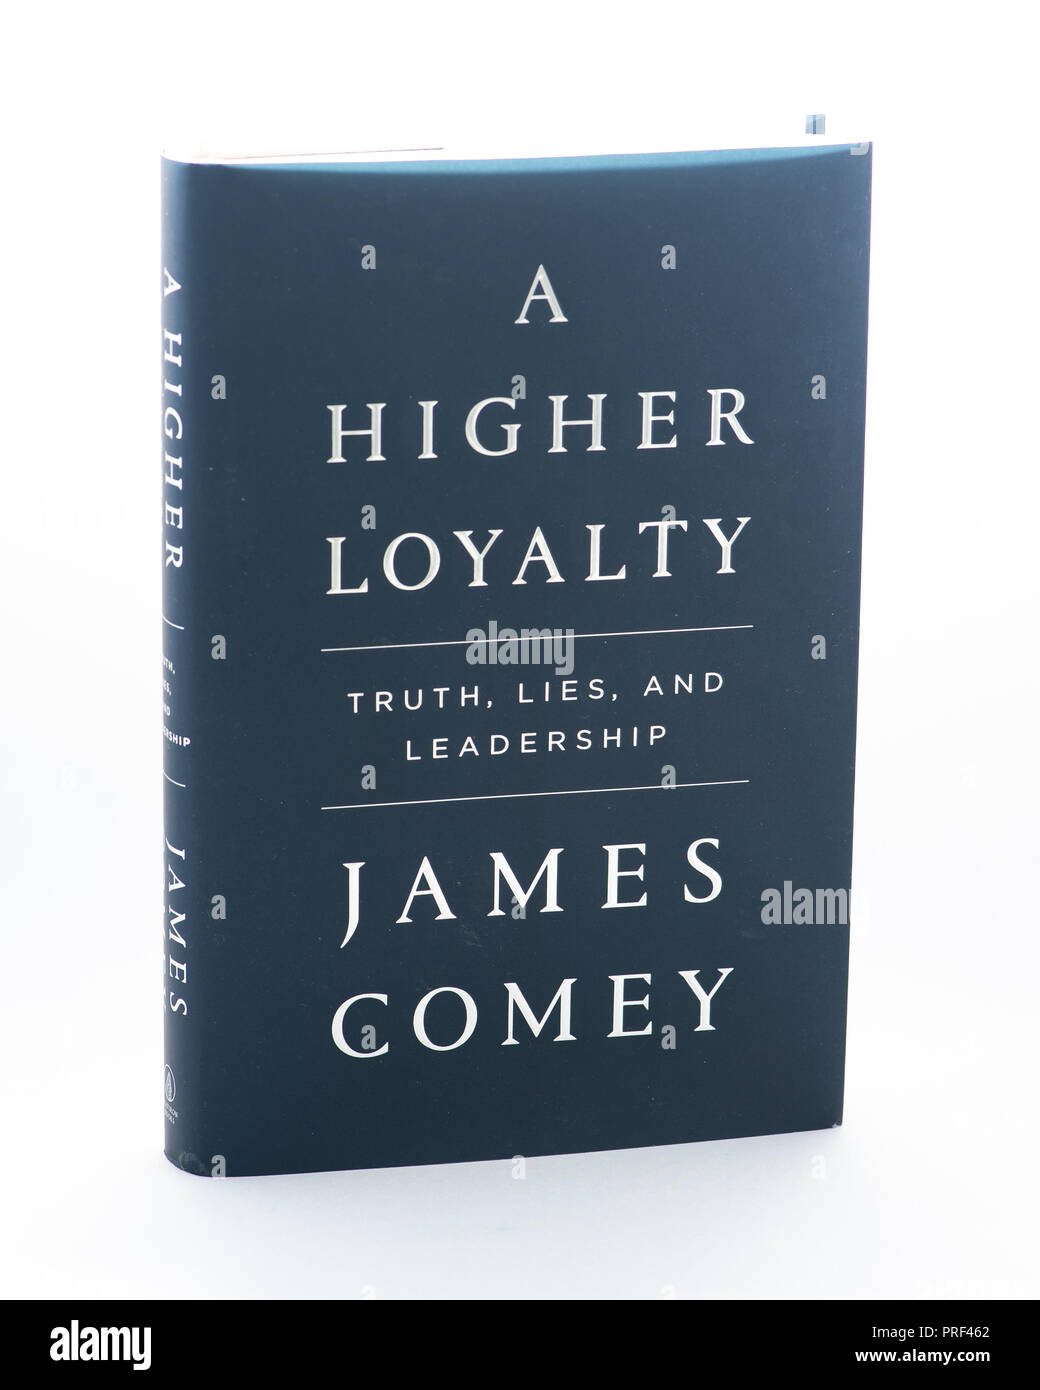 A Higher Loyalty, a book by James Comey, about leadership, loyalty, politics and values in the age of US President Donald Trump. Stock Photo